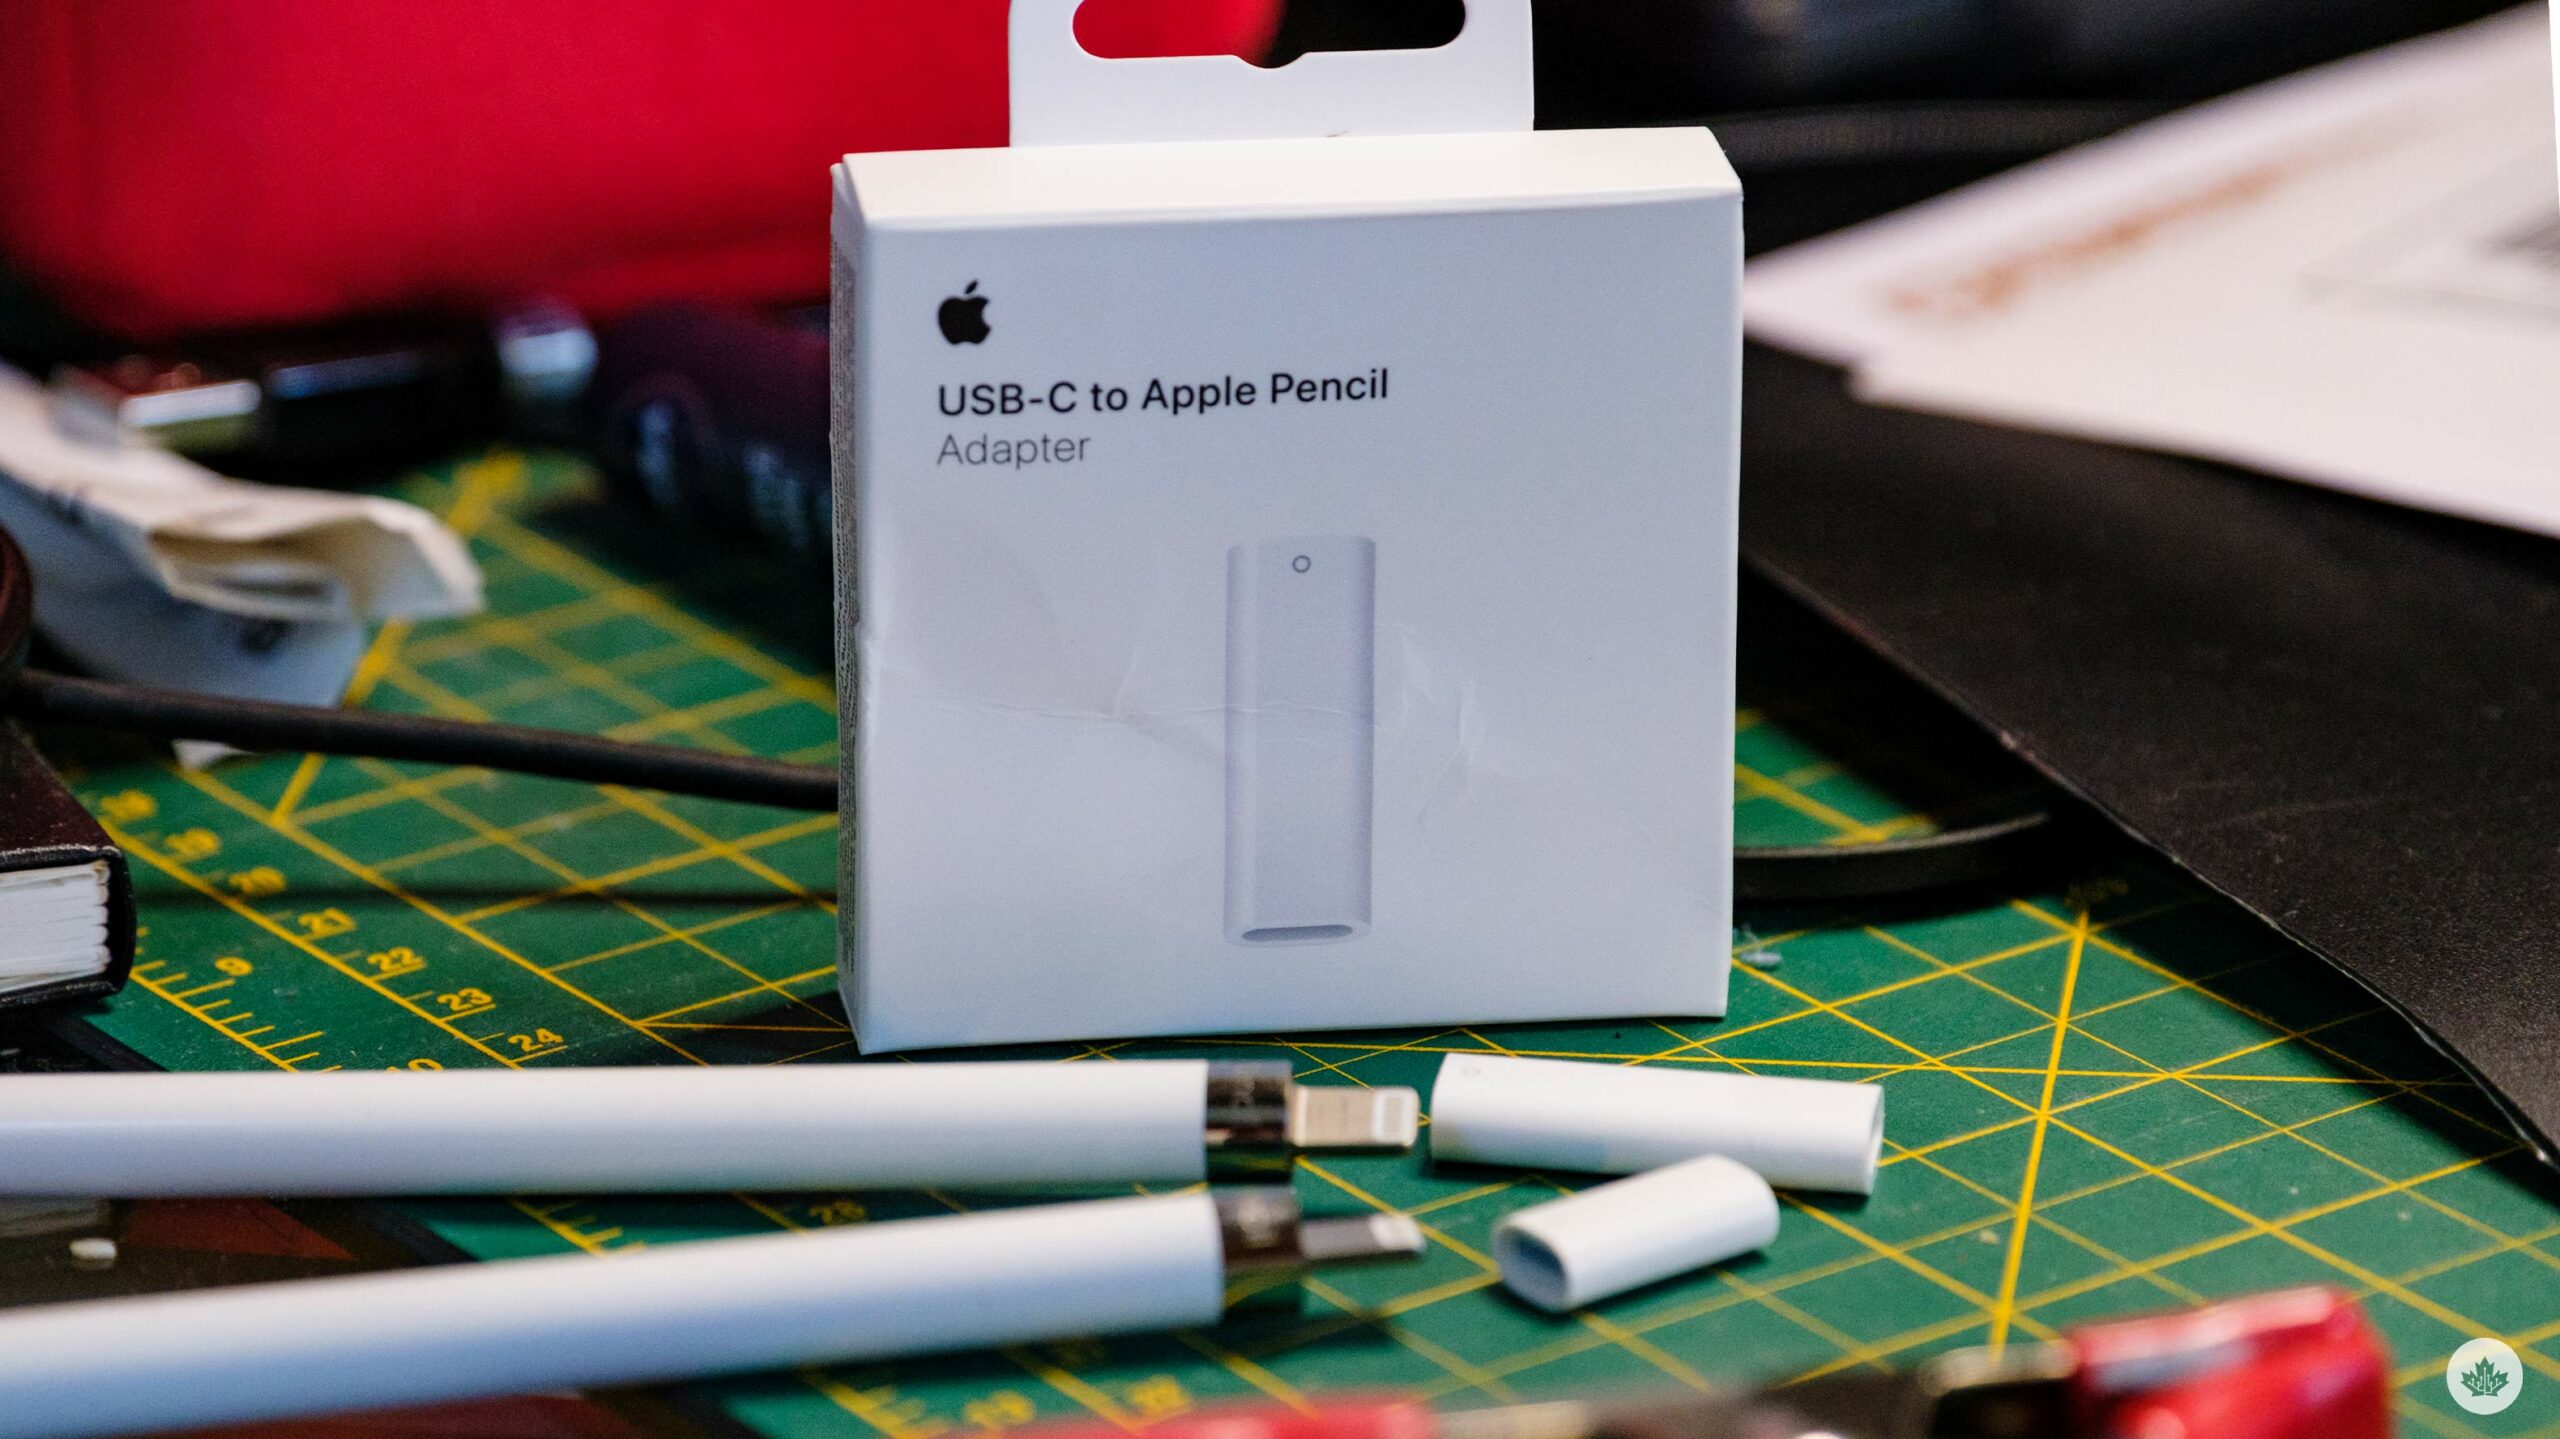 The Apple Pencil USB-C adapter is taking me to new dongle heights